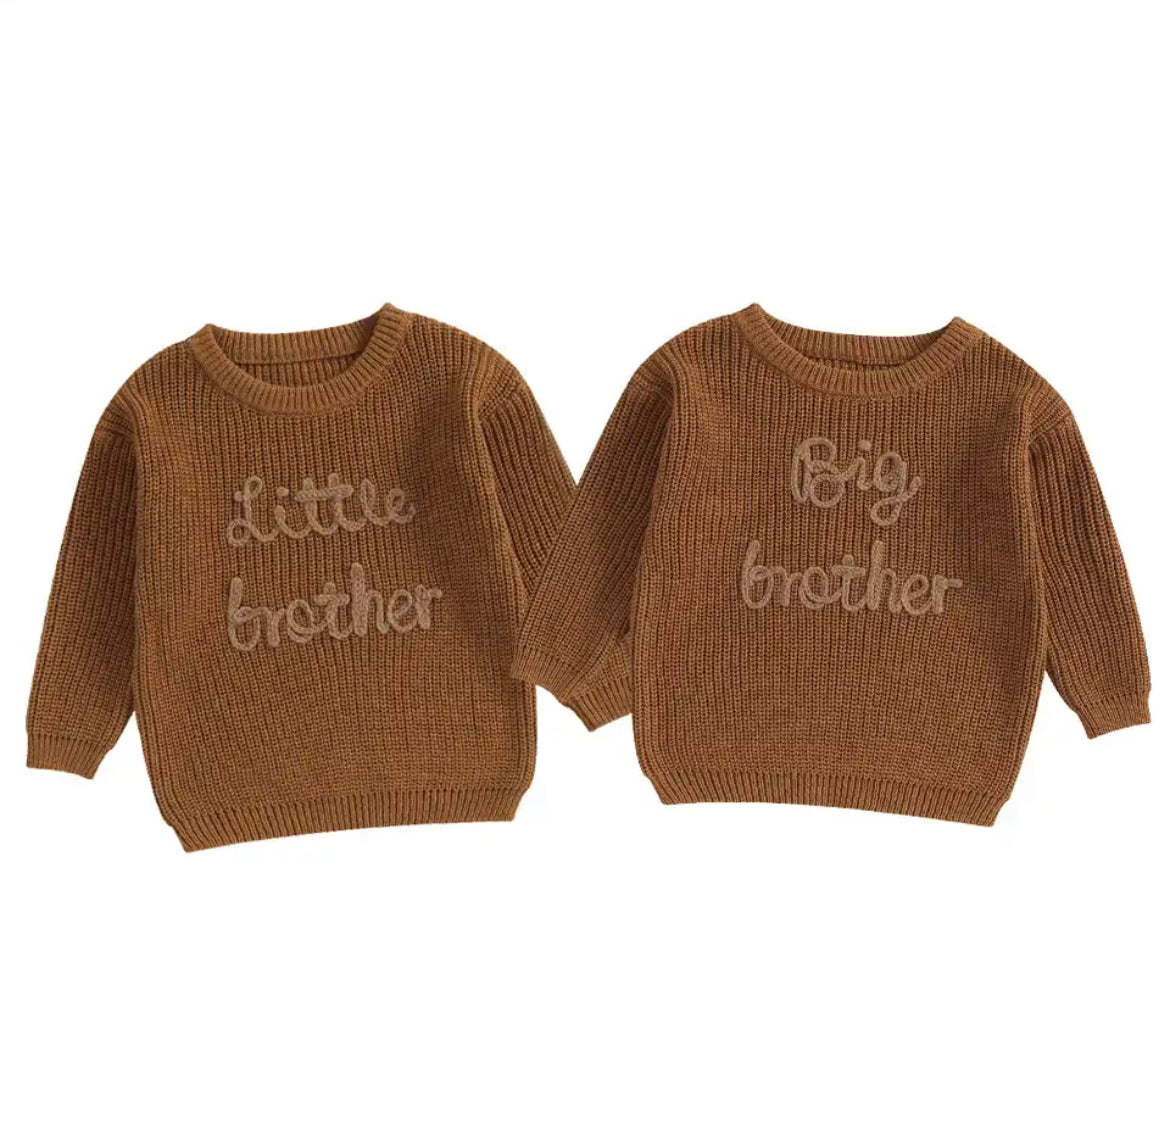 Big Sis | Lil Sis Matching Embroidered Sweaters